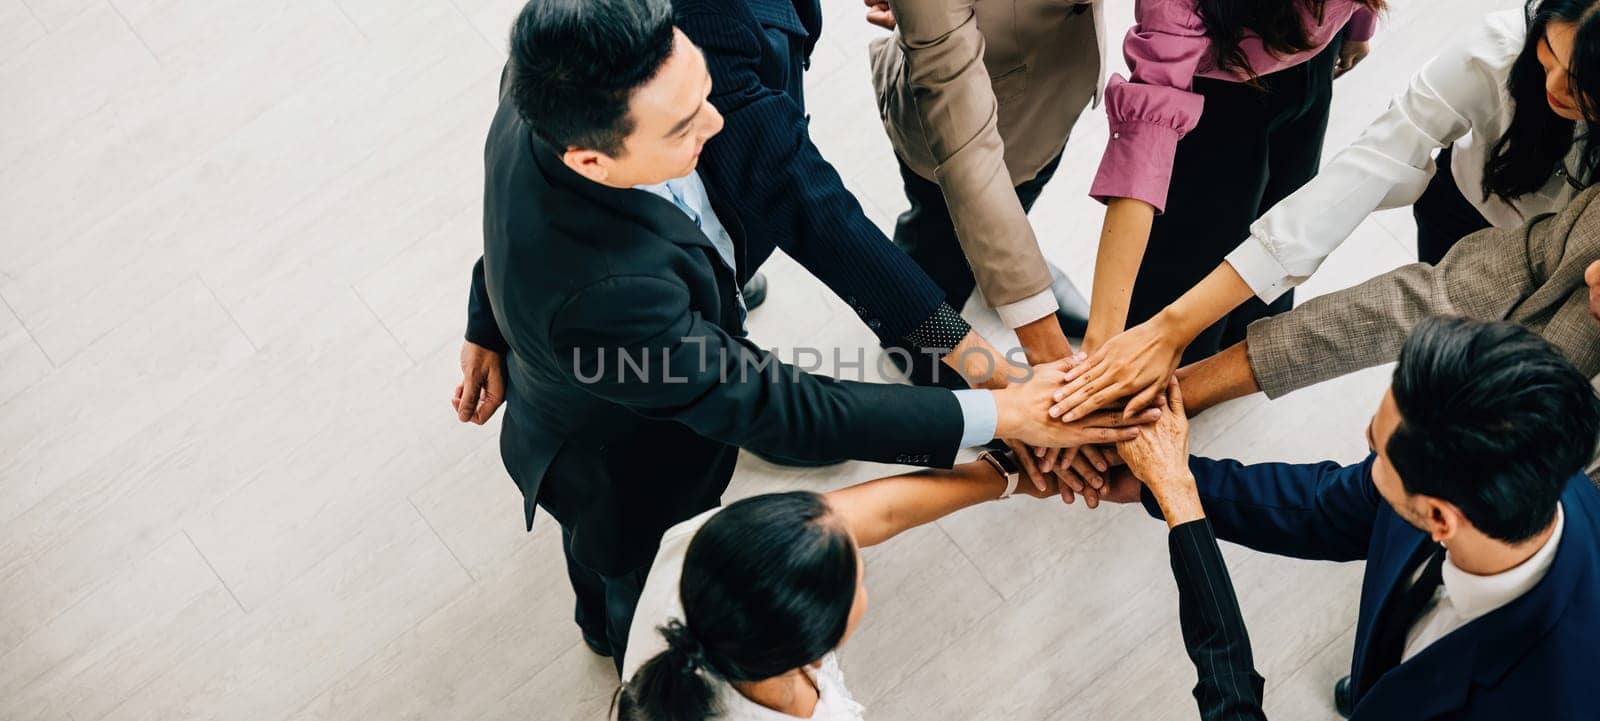 A top perspective reveals four diverse businesspeople standing in a circle stacking their hands. This image conveys the concepts of unity teamwork and global collaboration.